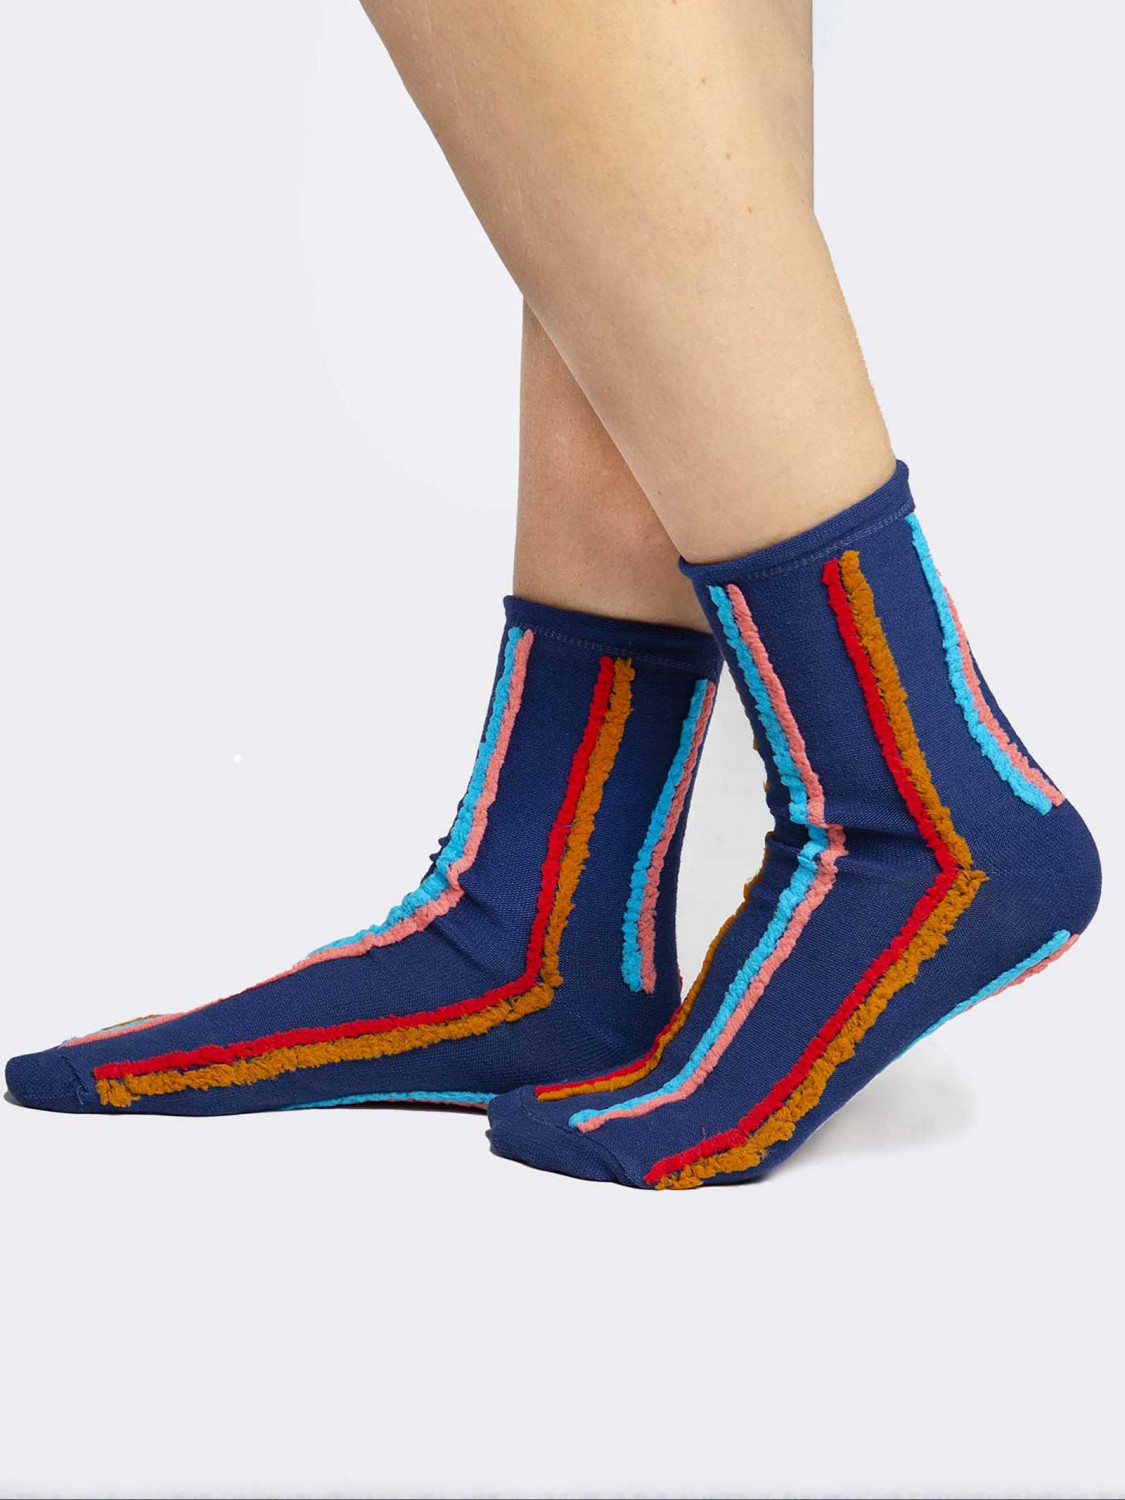 Women's crew socks with fringes in Warm Cotton